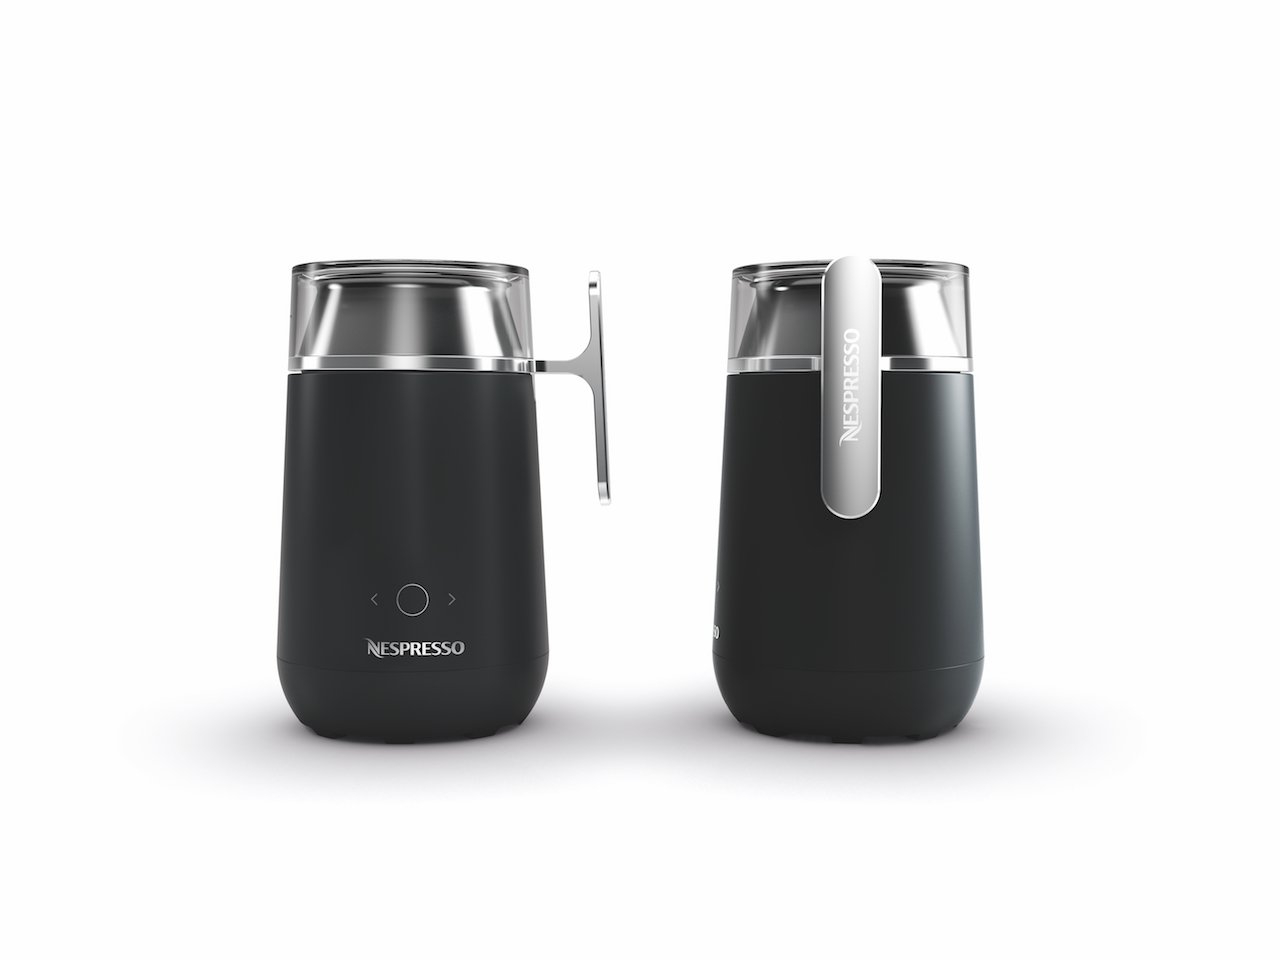 Is The Barista Milk Frother Worth The Price? Our Review